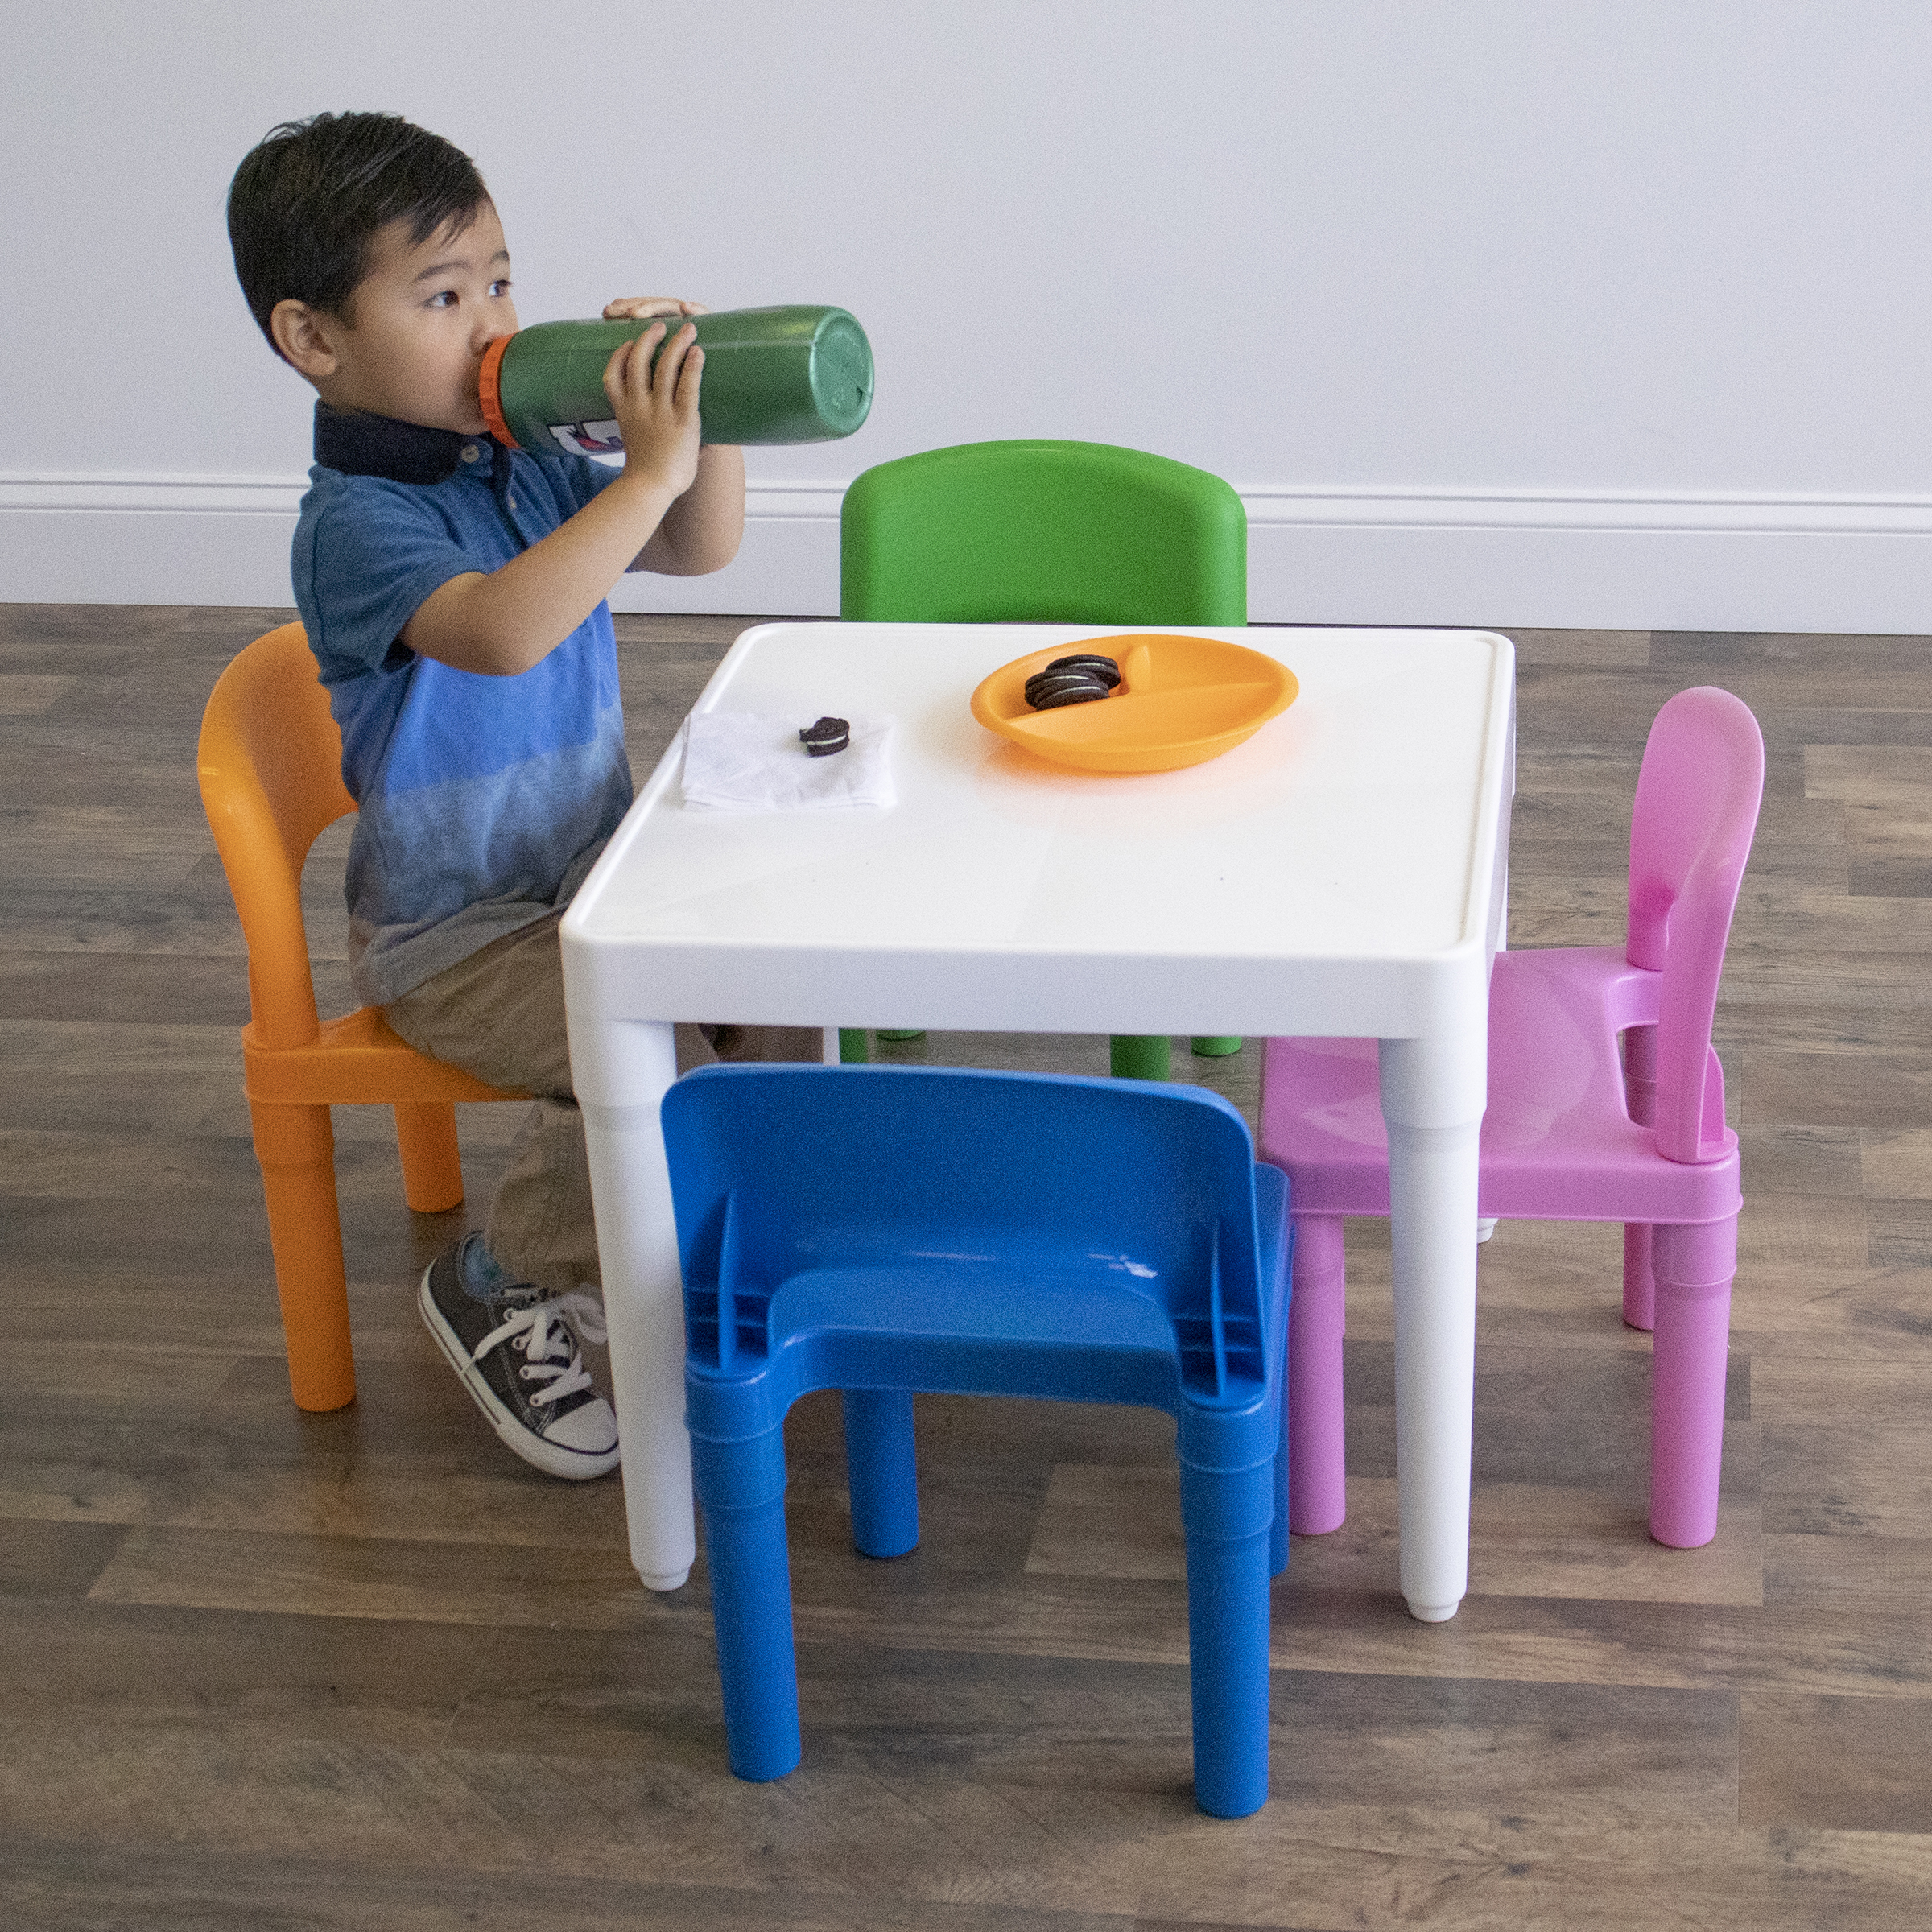 Humble Crew Lightweight Kids Plastic Dry Erase Table and 4 Chair Set, Multicolor - image 4 of 8